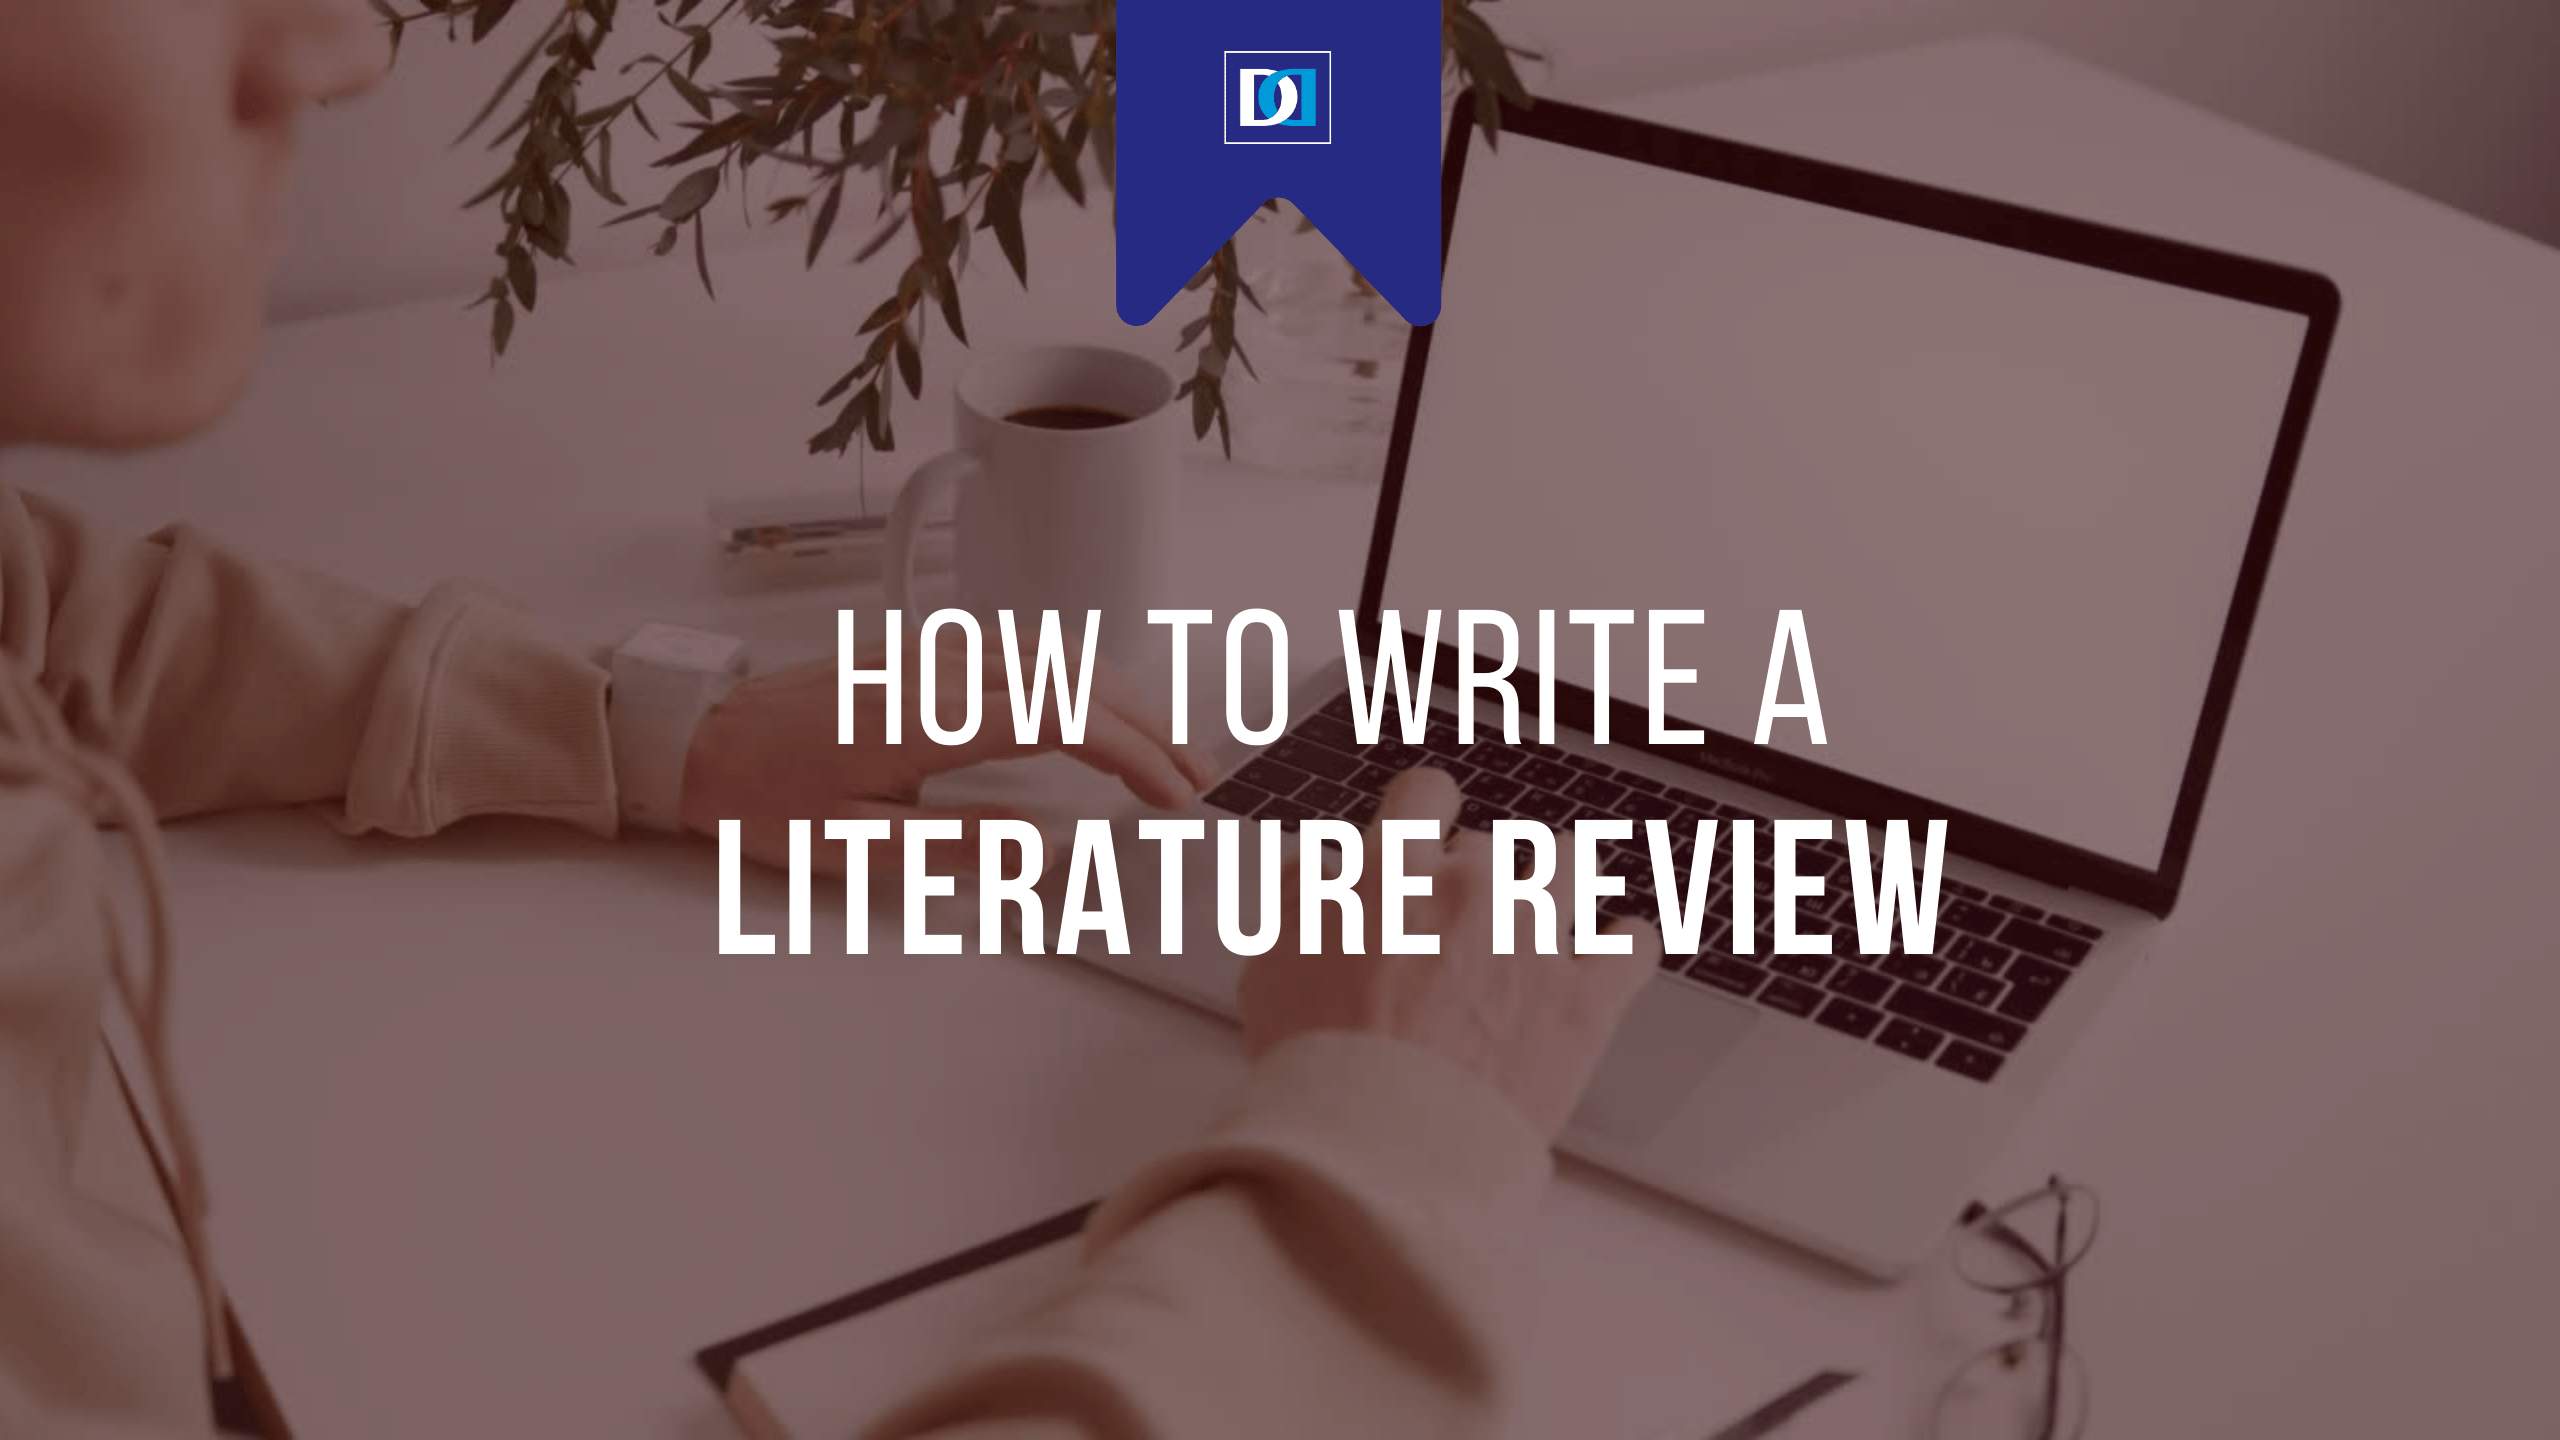 Help me write my literature review